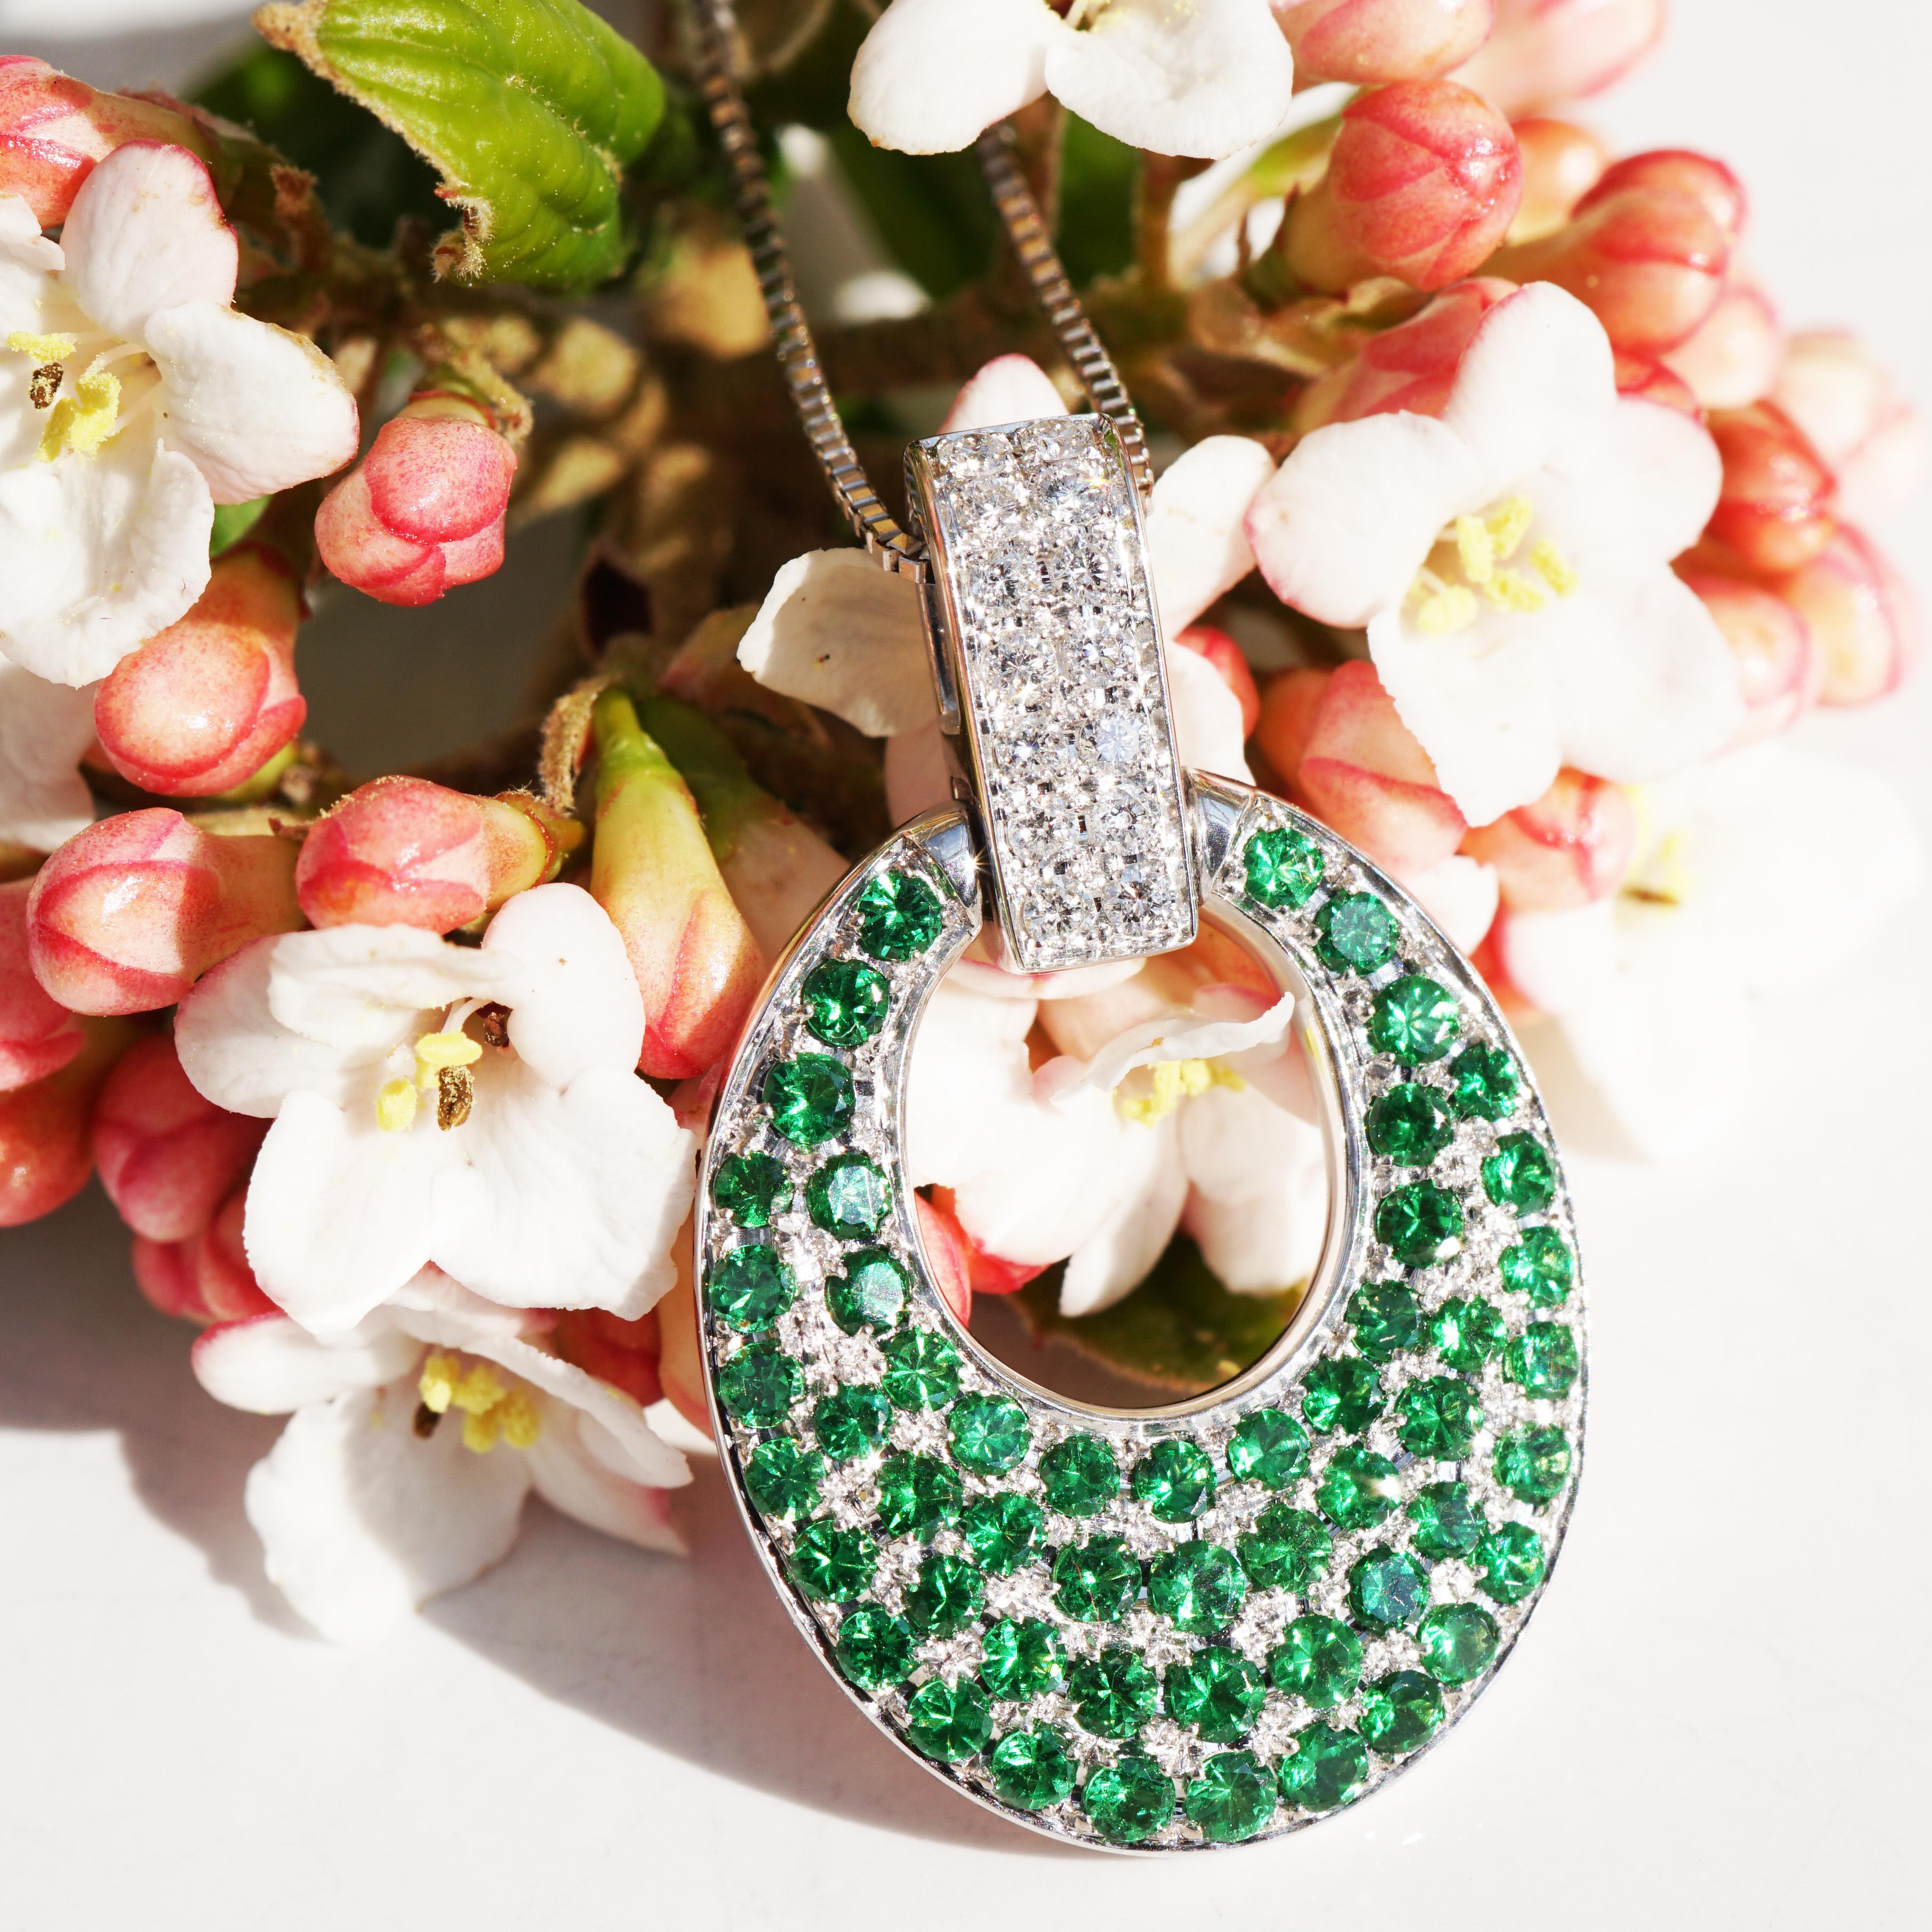 massive pendant in luxury quality, rectangular loop set with full-cut brilliant-cut diamonds total approx. 0.16 ct, TW-W (fine white-white) / VS (very small inclusions), heavy oval muggle pendant plate set with the finest tsavorites (green garnet)